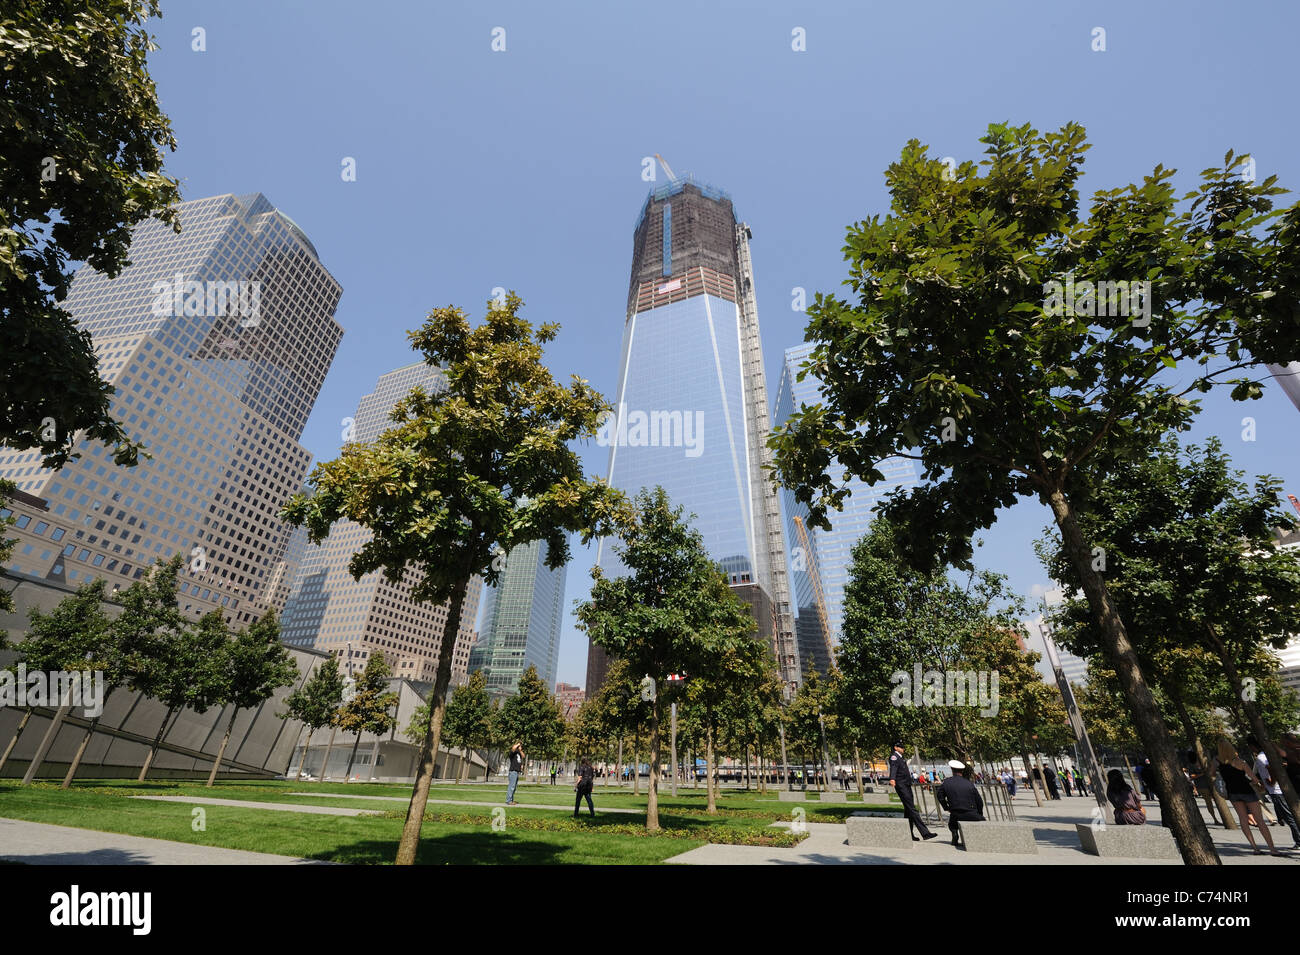 The plaza around the pools at the National September 11 Memorial in New York has been planted with swamp white oak trees. Stock Photo